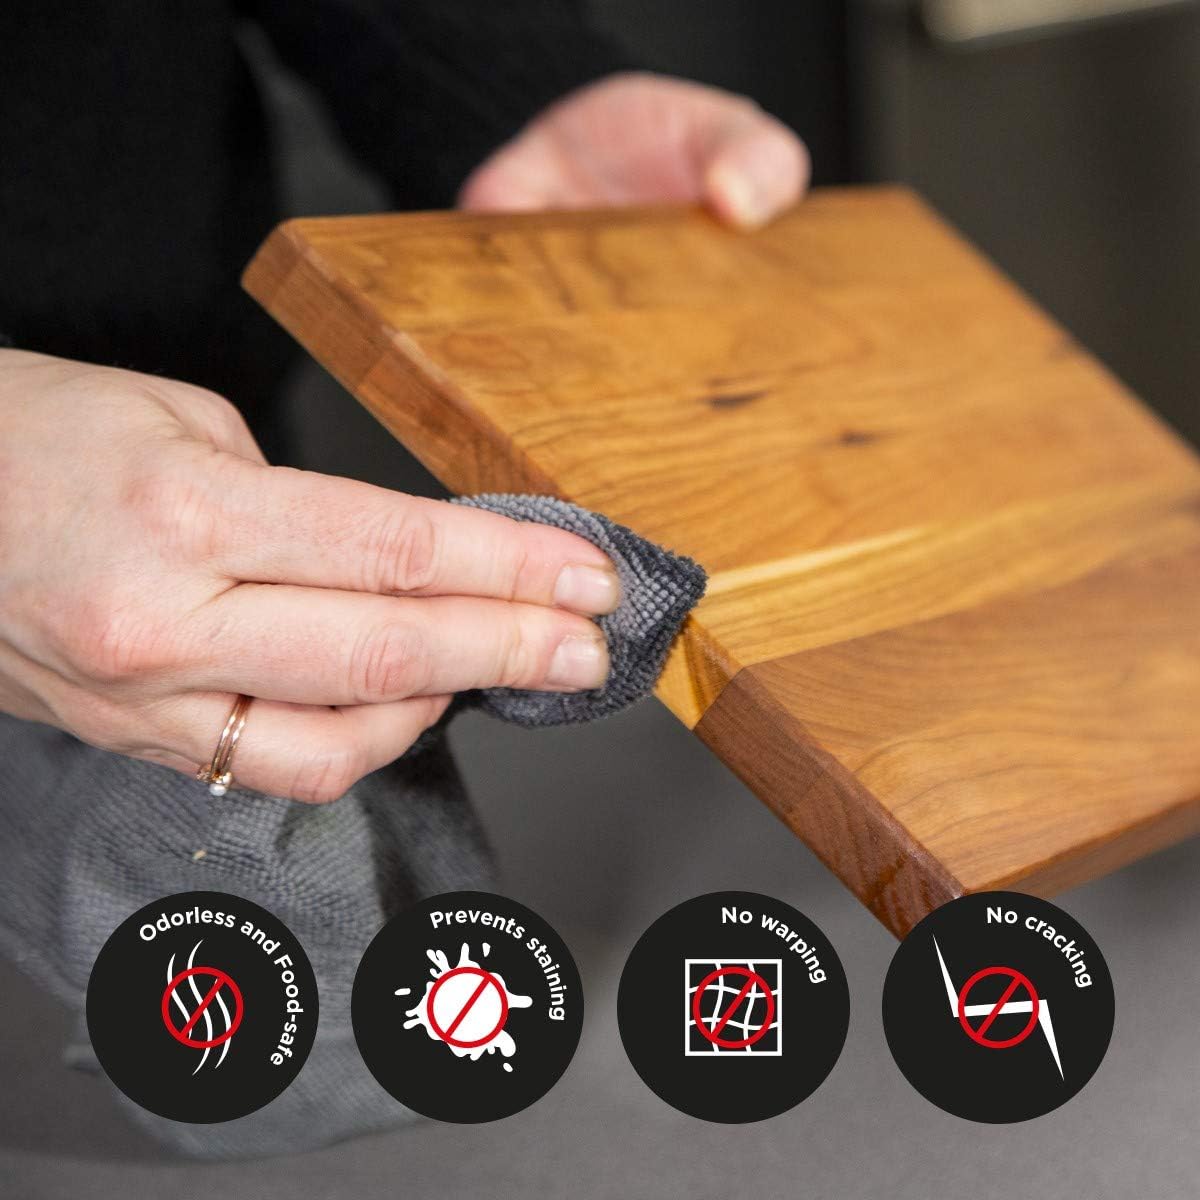 Cutting Board Food Grade Mineral Oil (8,5 oz) - Revitalize Cutting Board, Butcher Block, Countertops and Wood Utensils - Food Safe - Made in North America : Health & Household